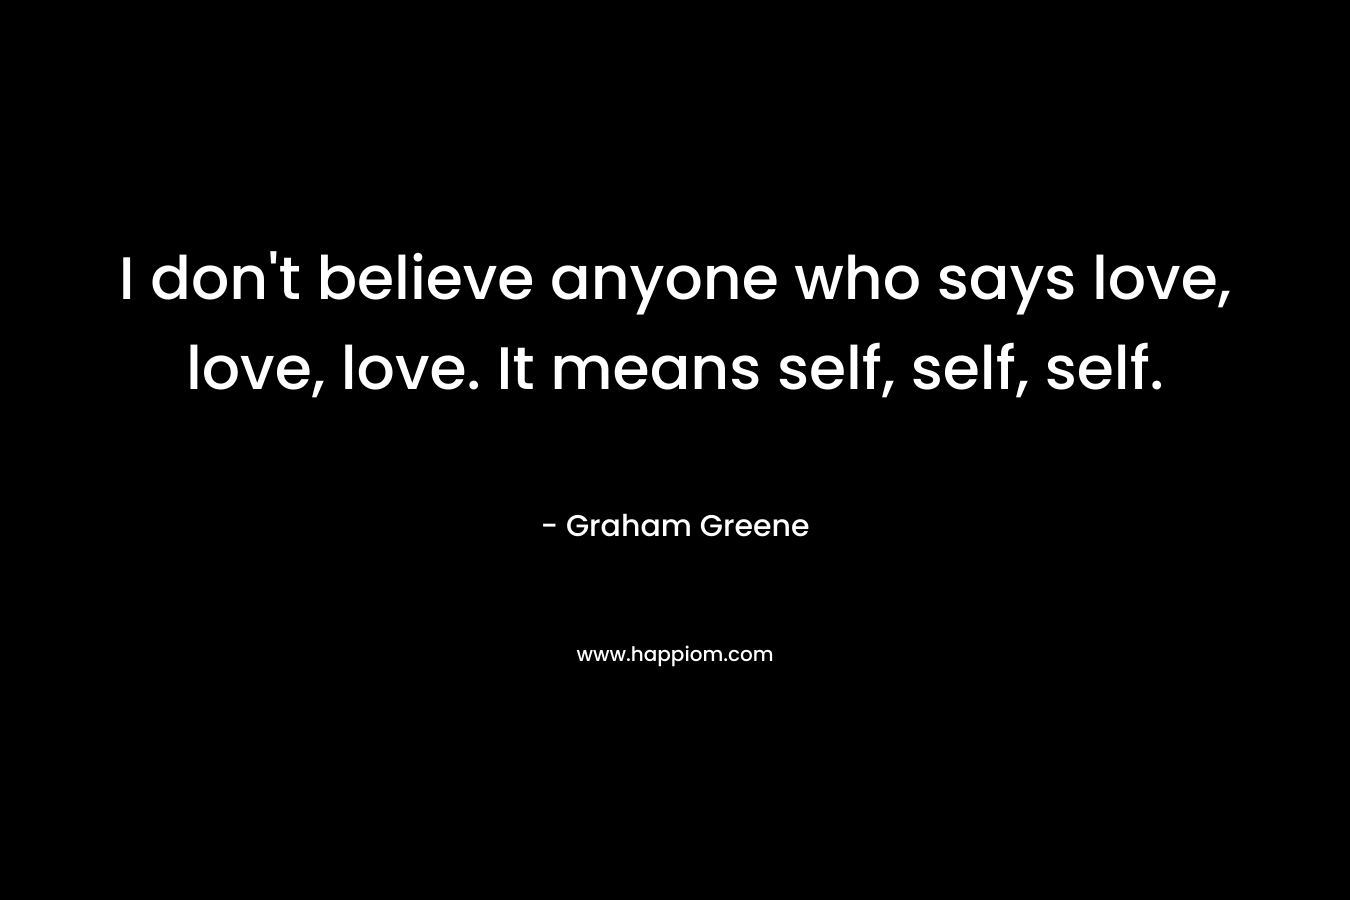 I don't believe anyone who says love, love, love. It means self, self, self.